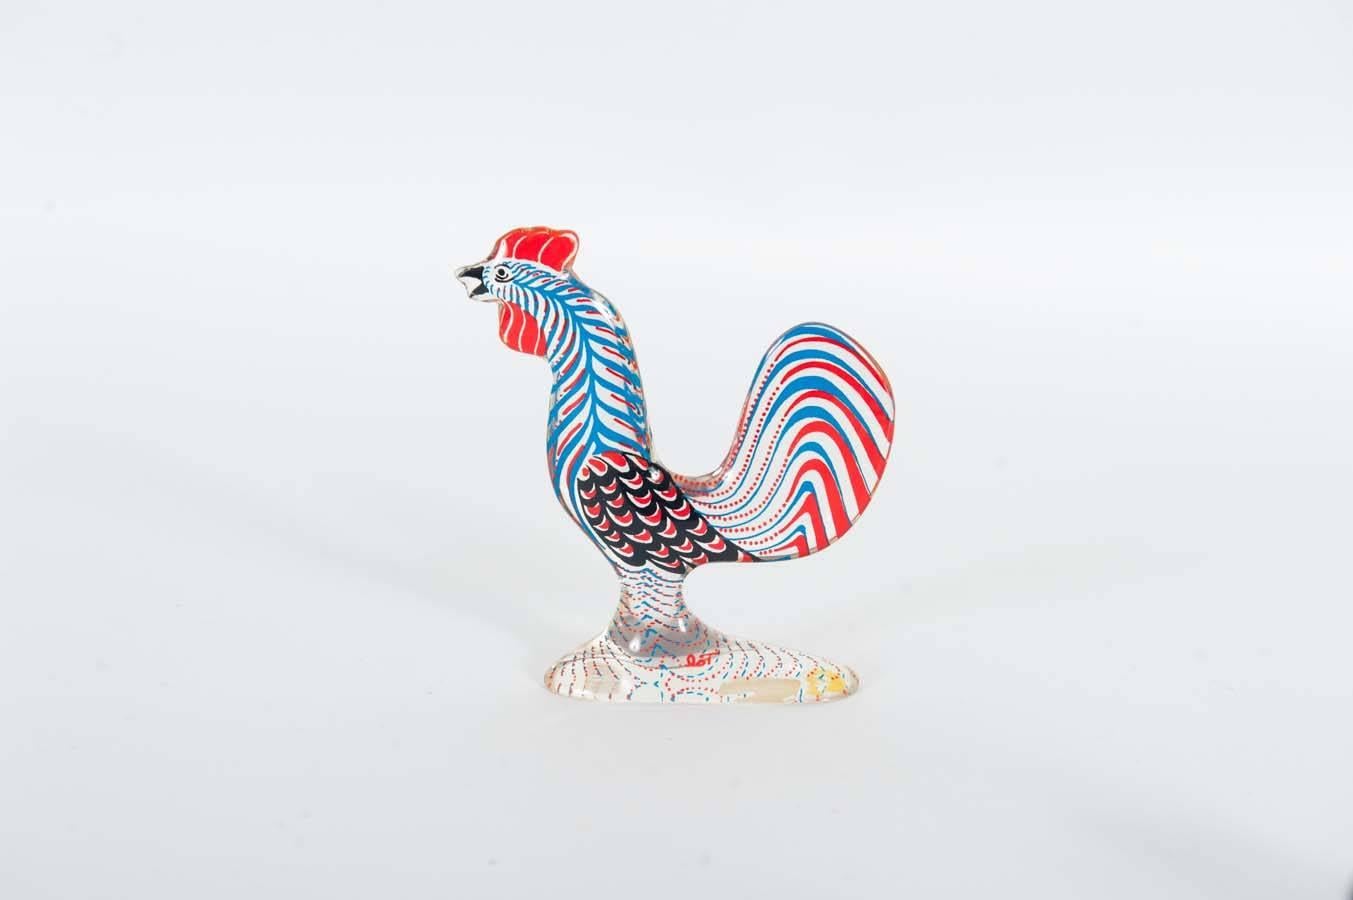 A rooster, a chicken and a chick by Abraham Palatnik.

Measurements:
Rooster 11.5 cm (h) x 11 cm (w) x 2.5 cm (d).
Chicken 6.5 cm x 9 cm x 1.5 cm.
Chick 7.5 cm x 7.5 cm x 1 cm.

The Brazilian artist Abraham Palatnik (1928) was the founder of